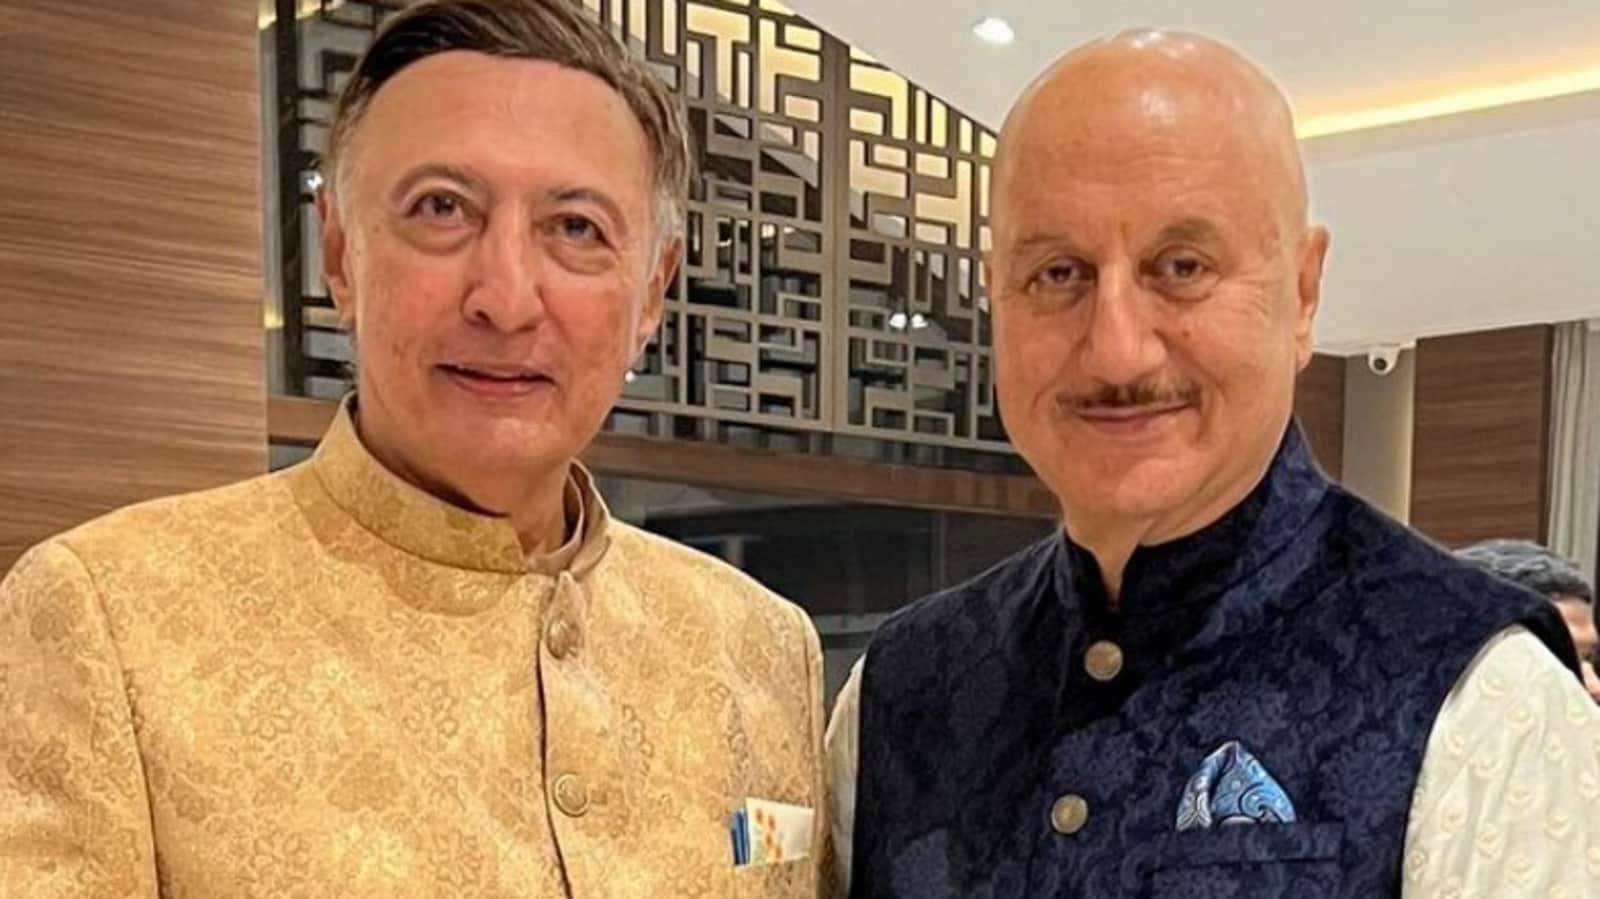 Anupam Kher attends Khichdi actor Anang Desai’s son’s wedding, recalls being his roommate for three years. See pics